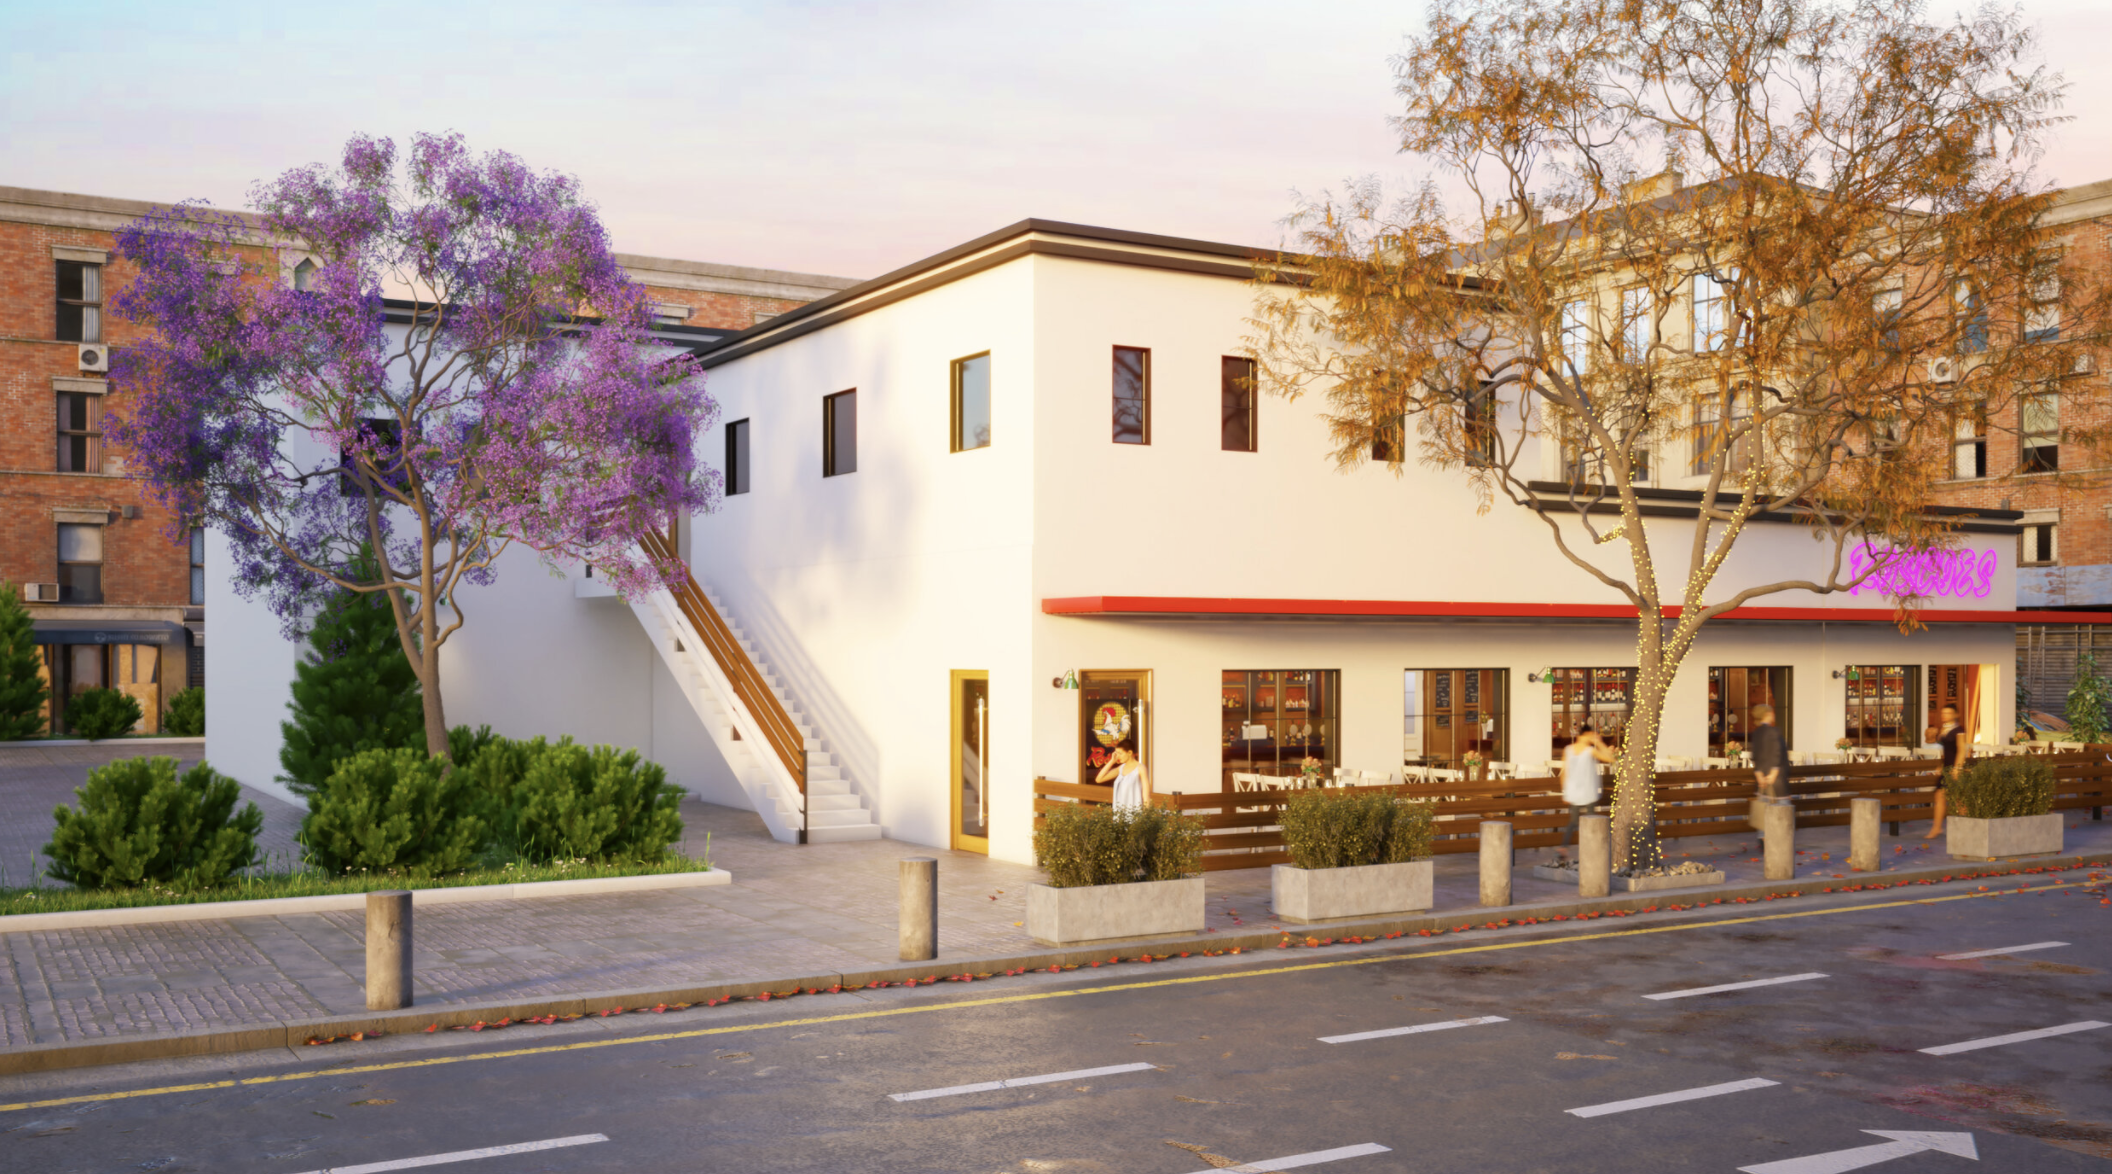 Rendering of Roscoe’s House of Chicken and Waffles restaurant.